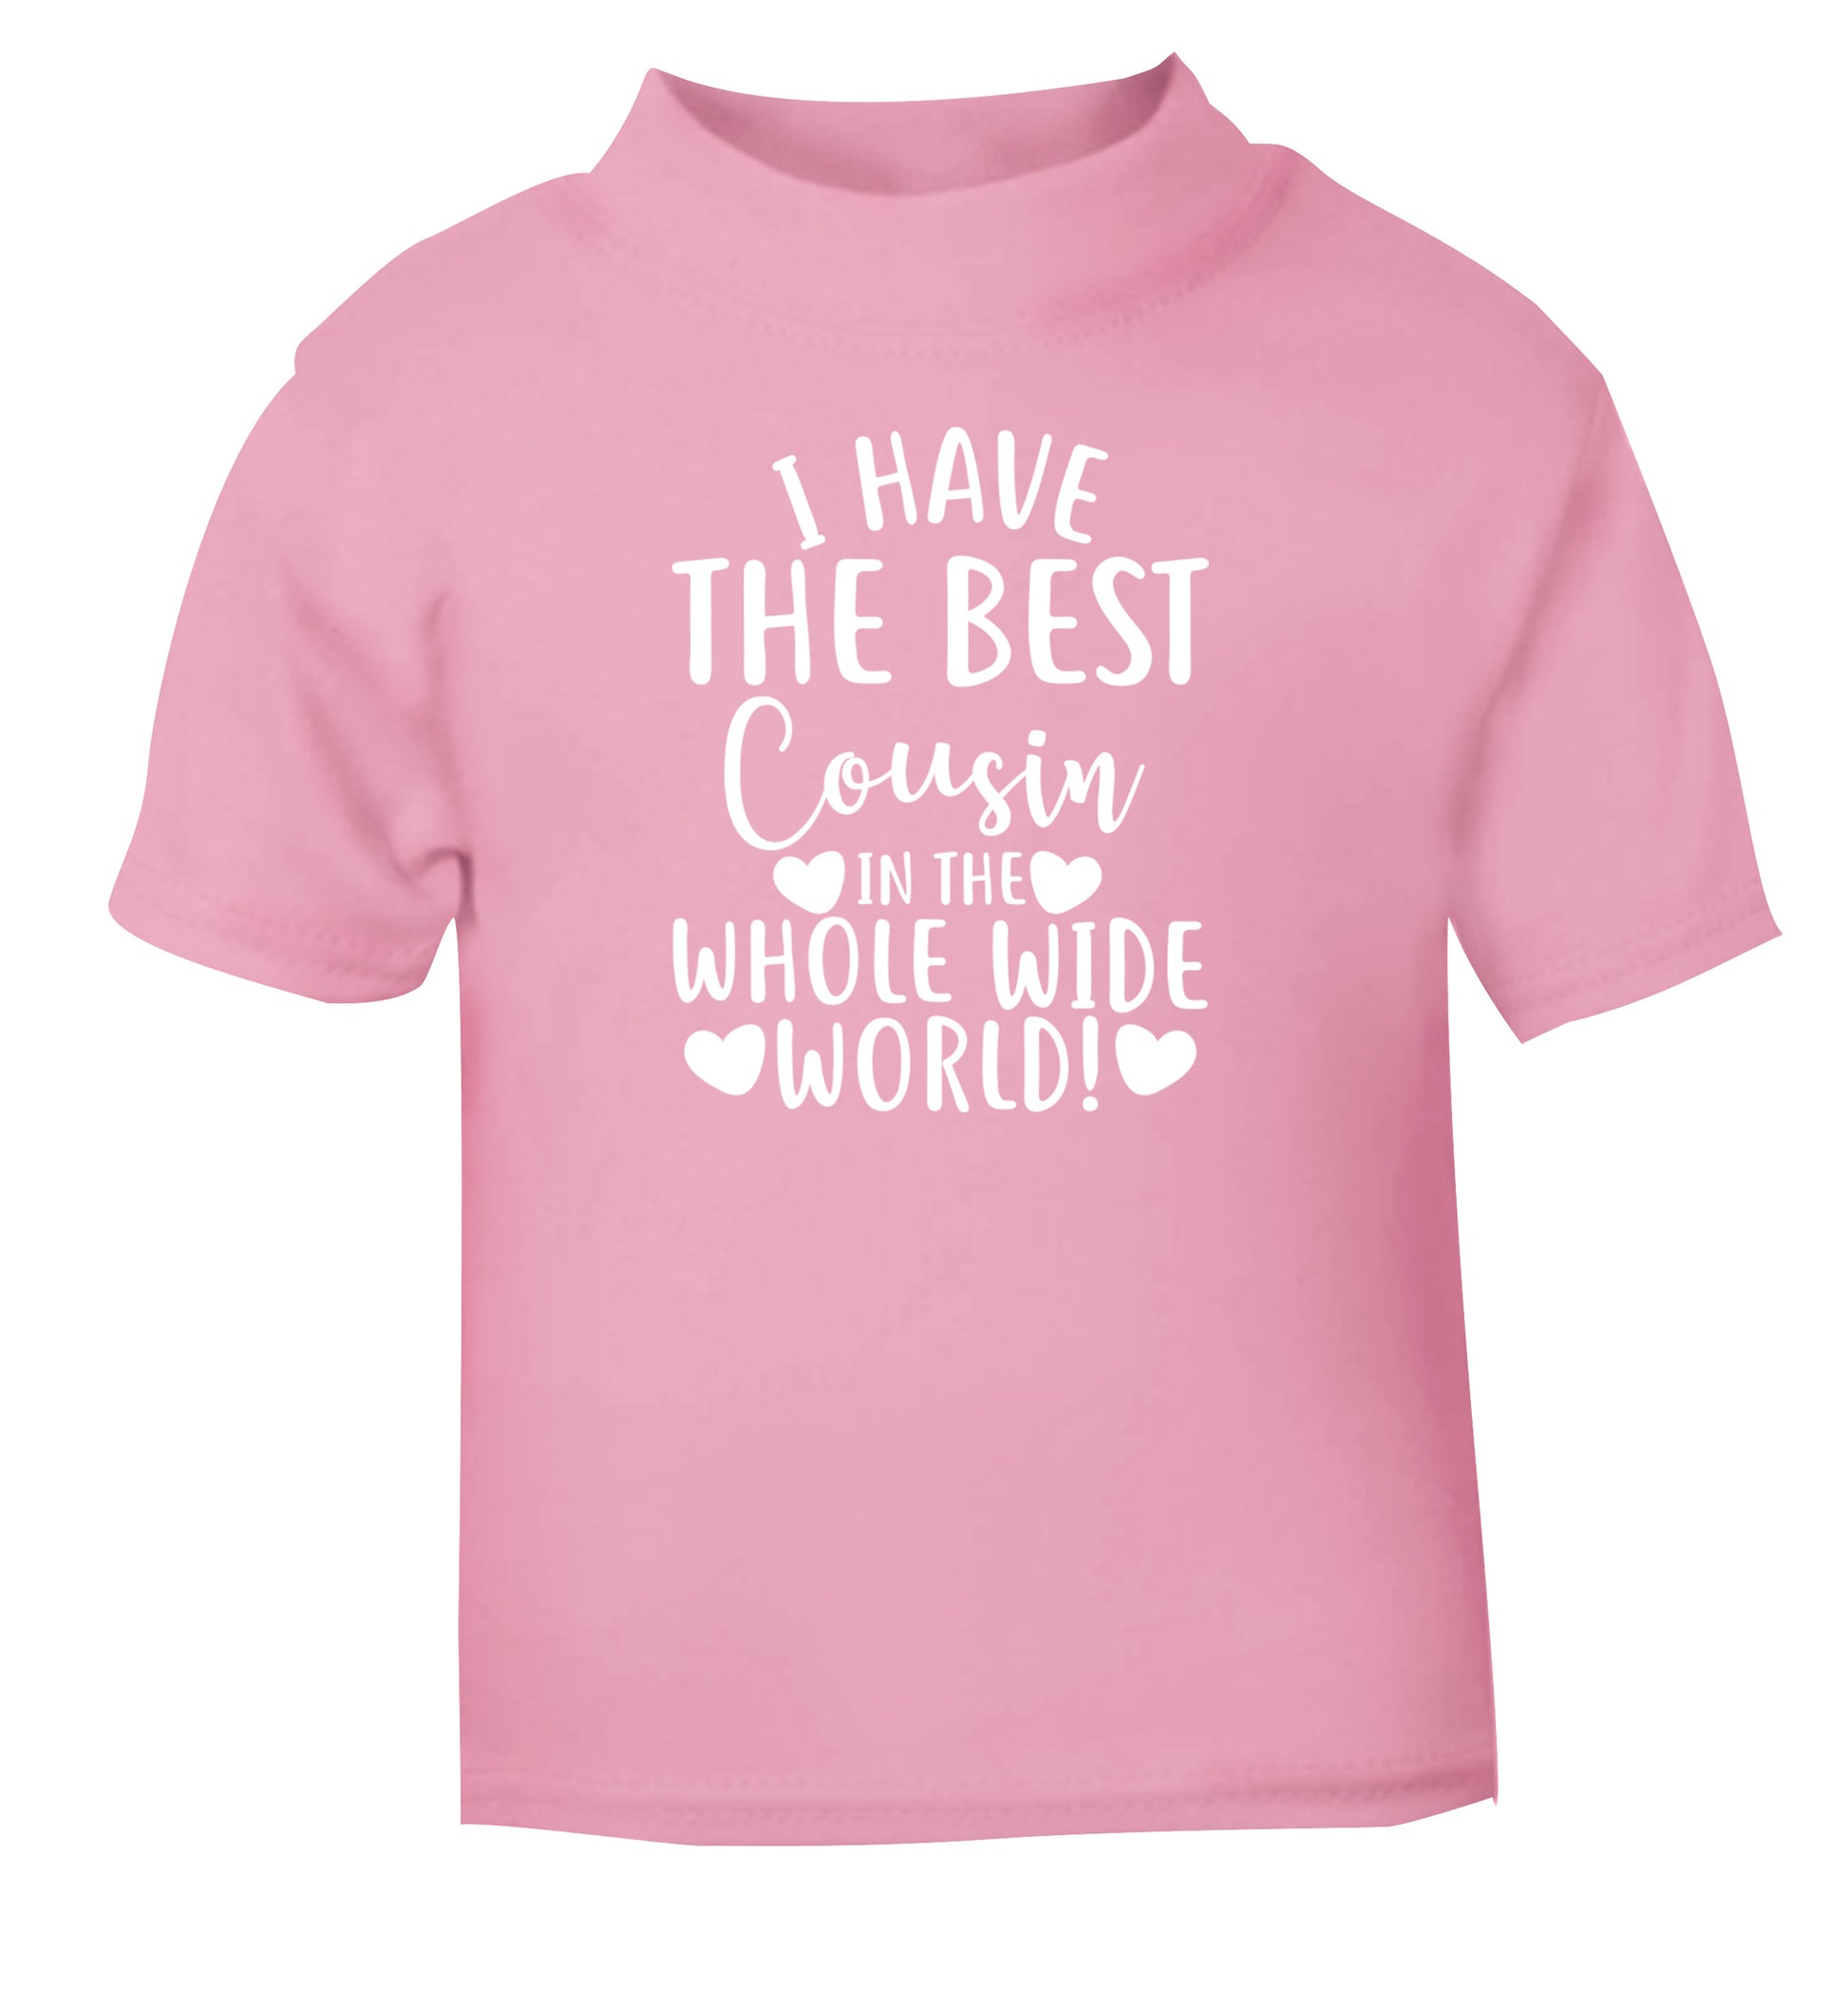 I have the best cousin in the whole wide world! light pink Baby Toddler Tshirt 2 Years